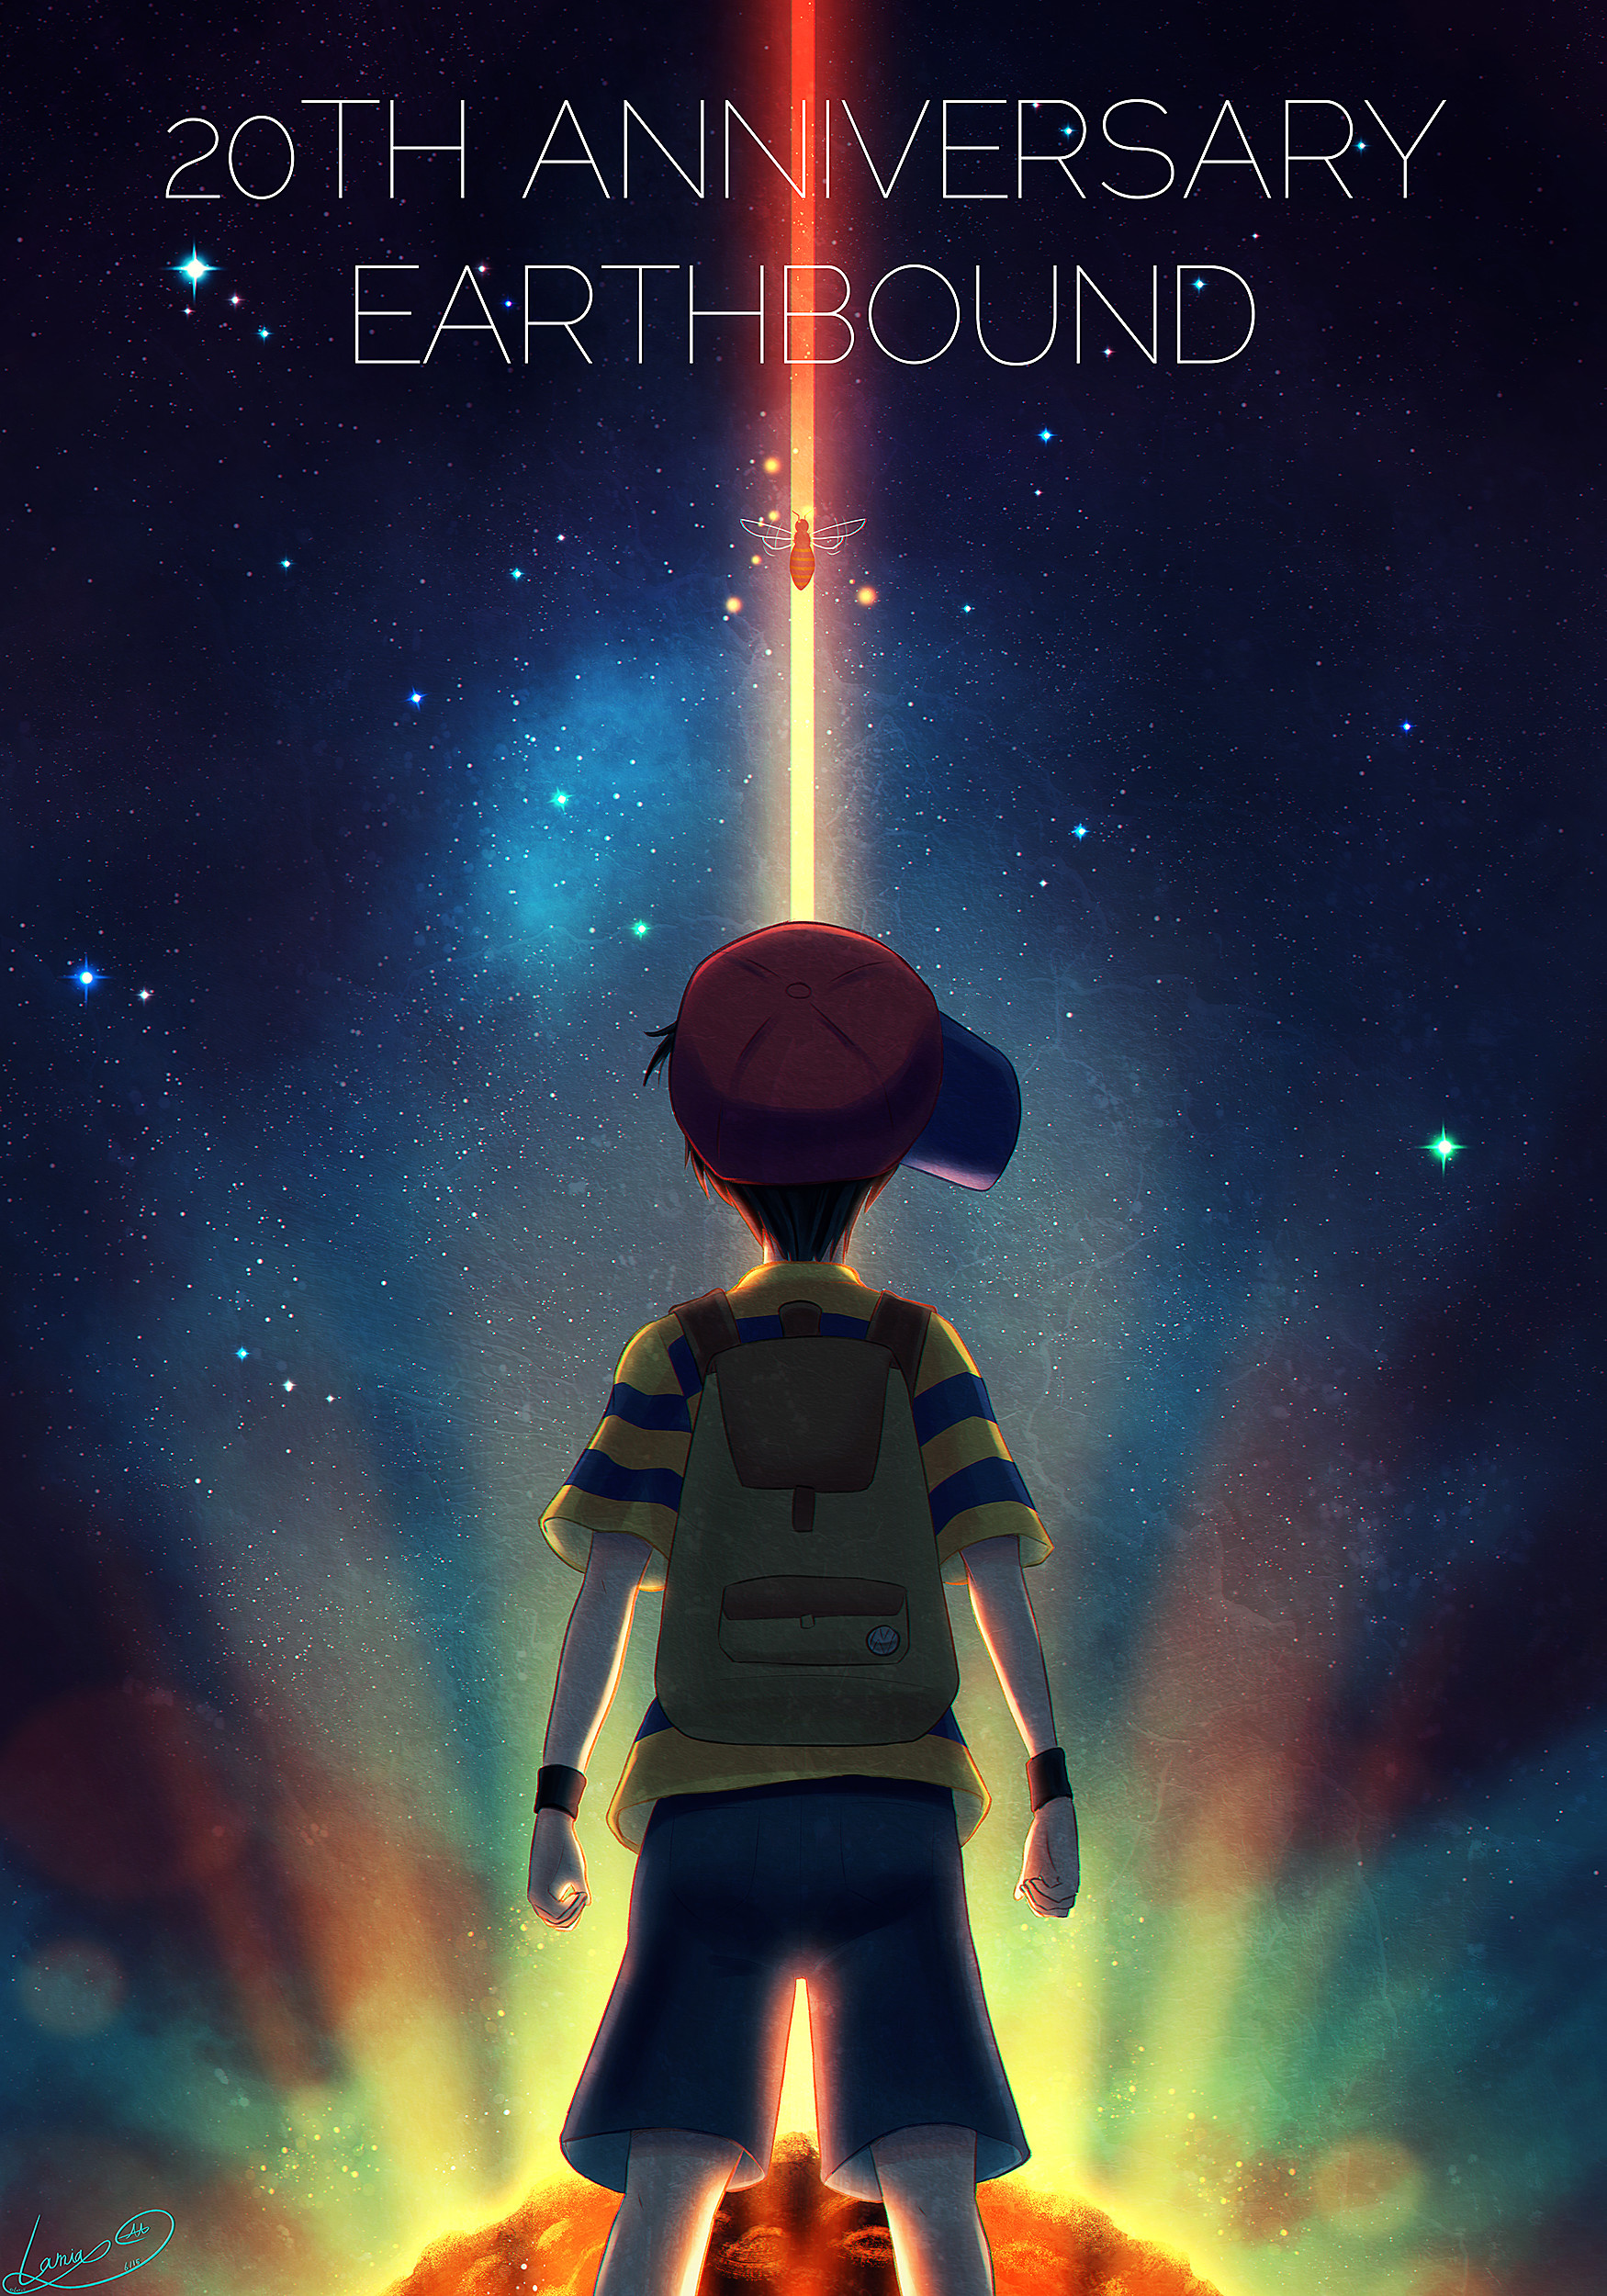 1750x2500 Earthbound 20th Anniversary by Lopuii Earthbound 20th Anniversary by Lopuii